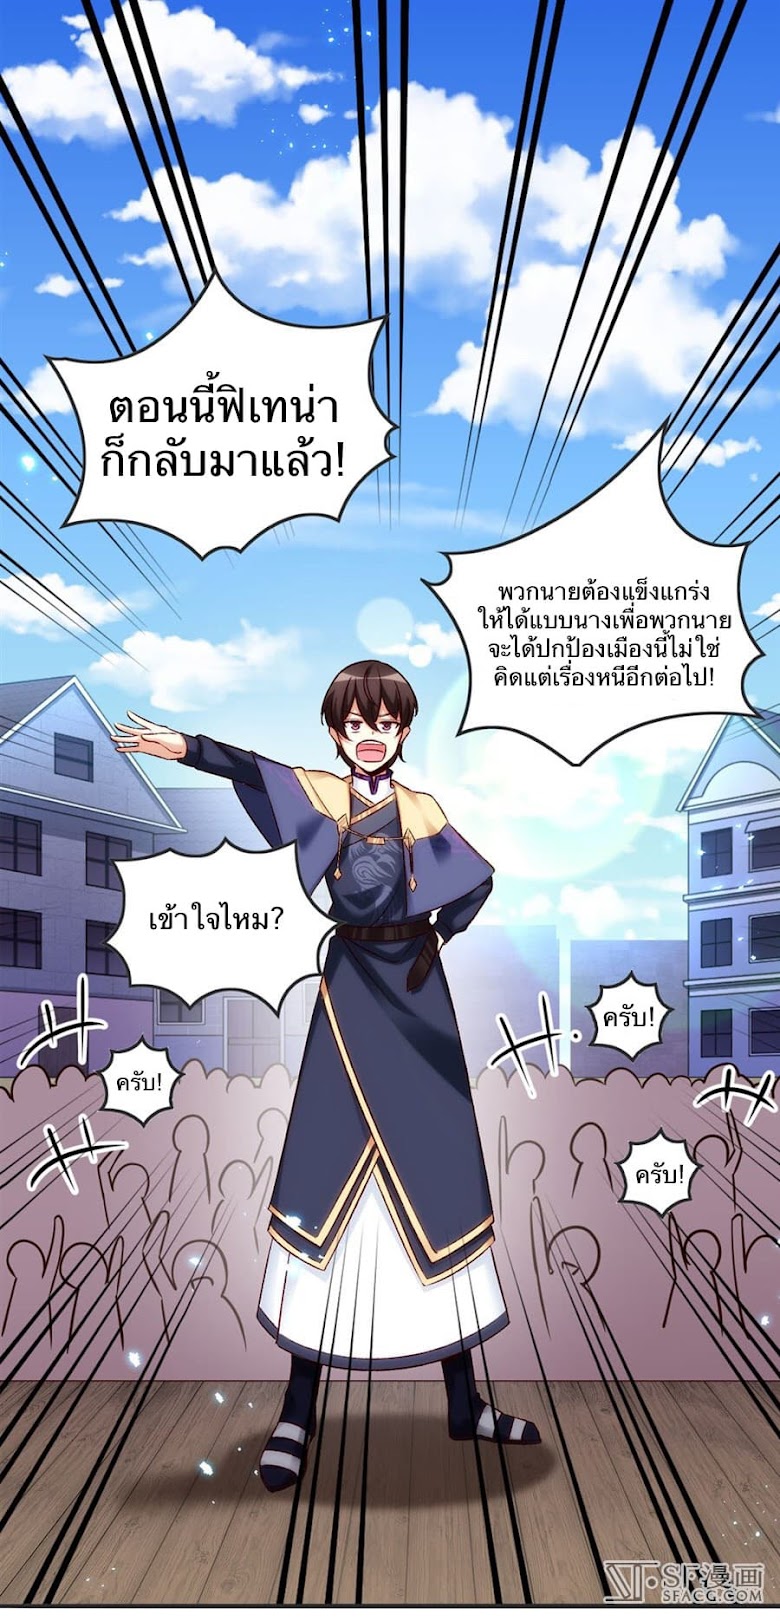 Nobleman and so what? - หน้า 26